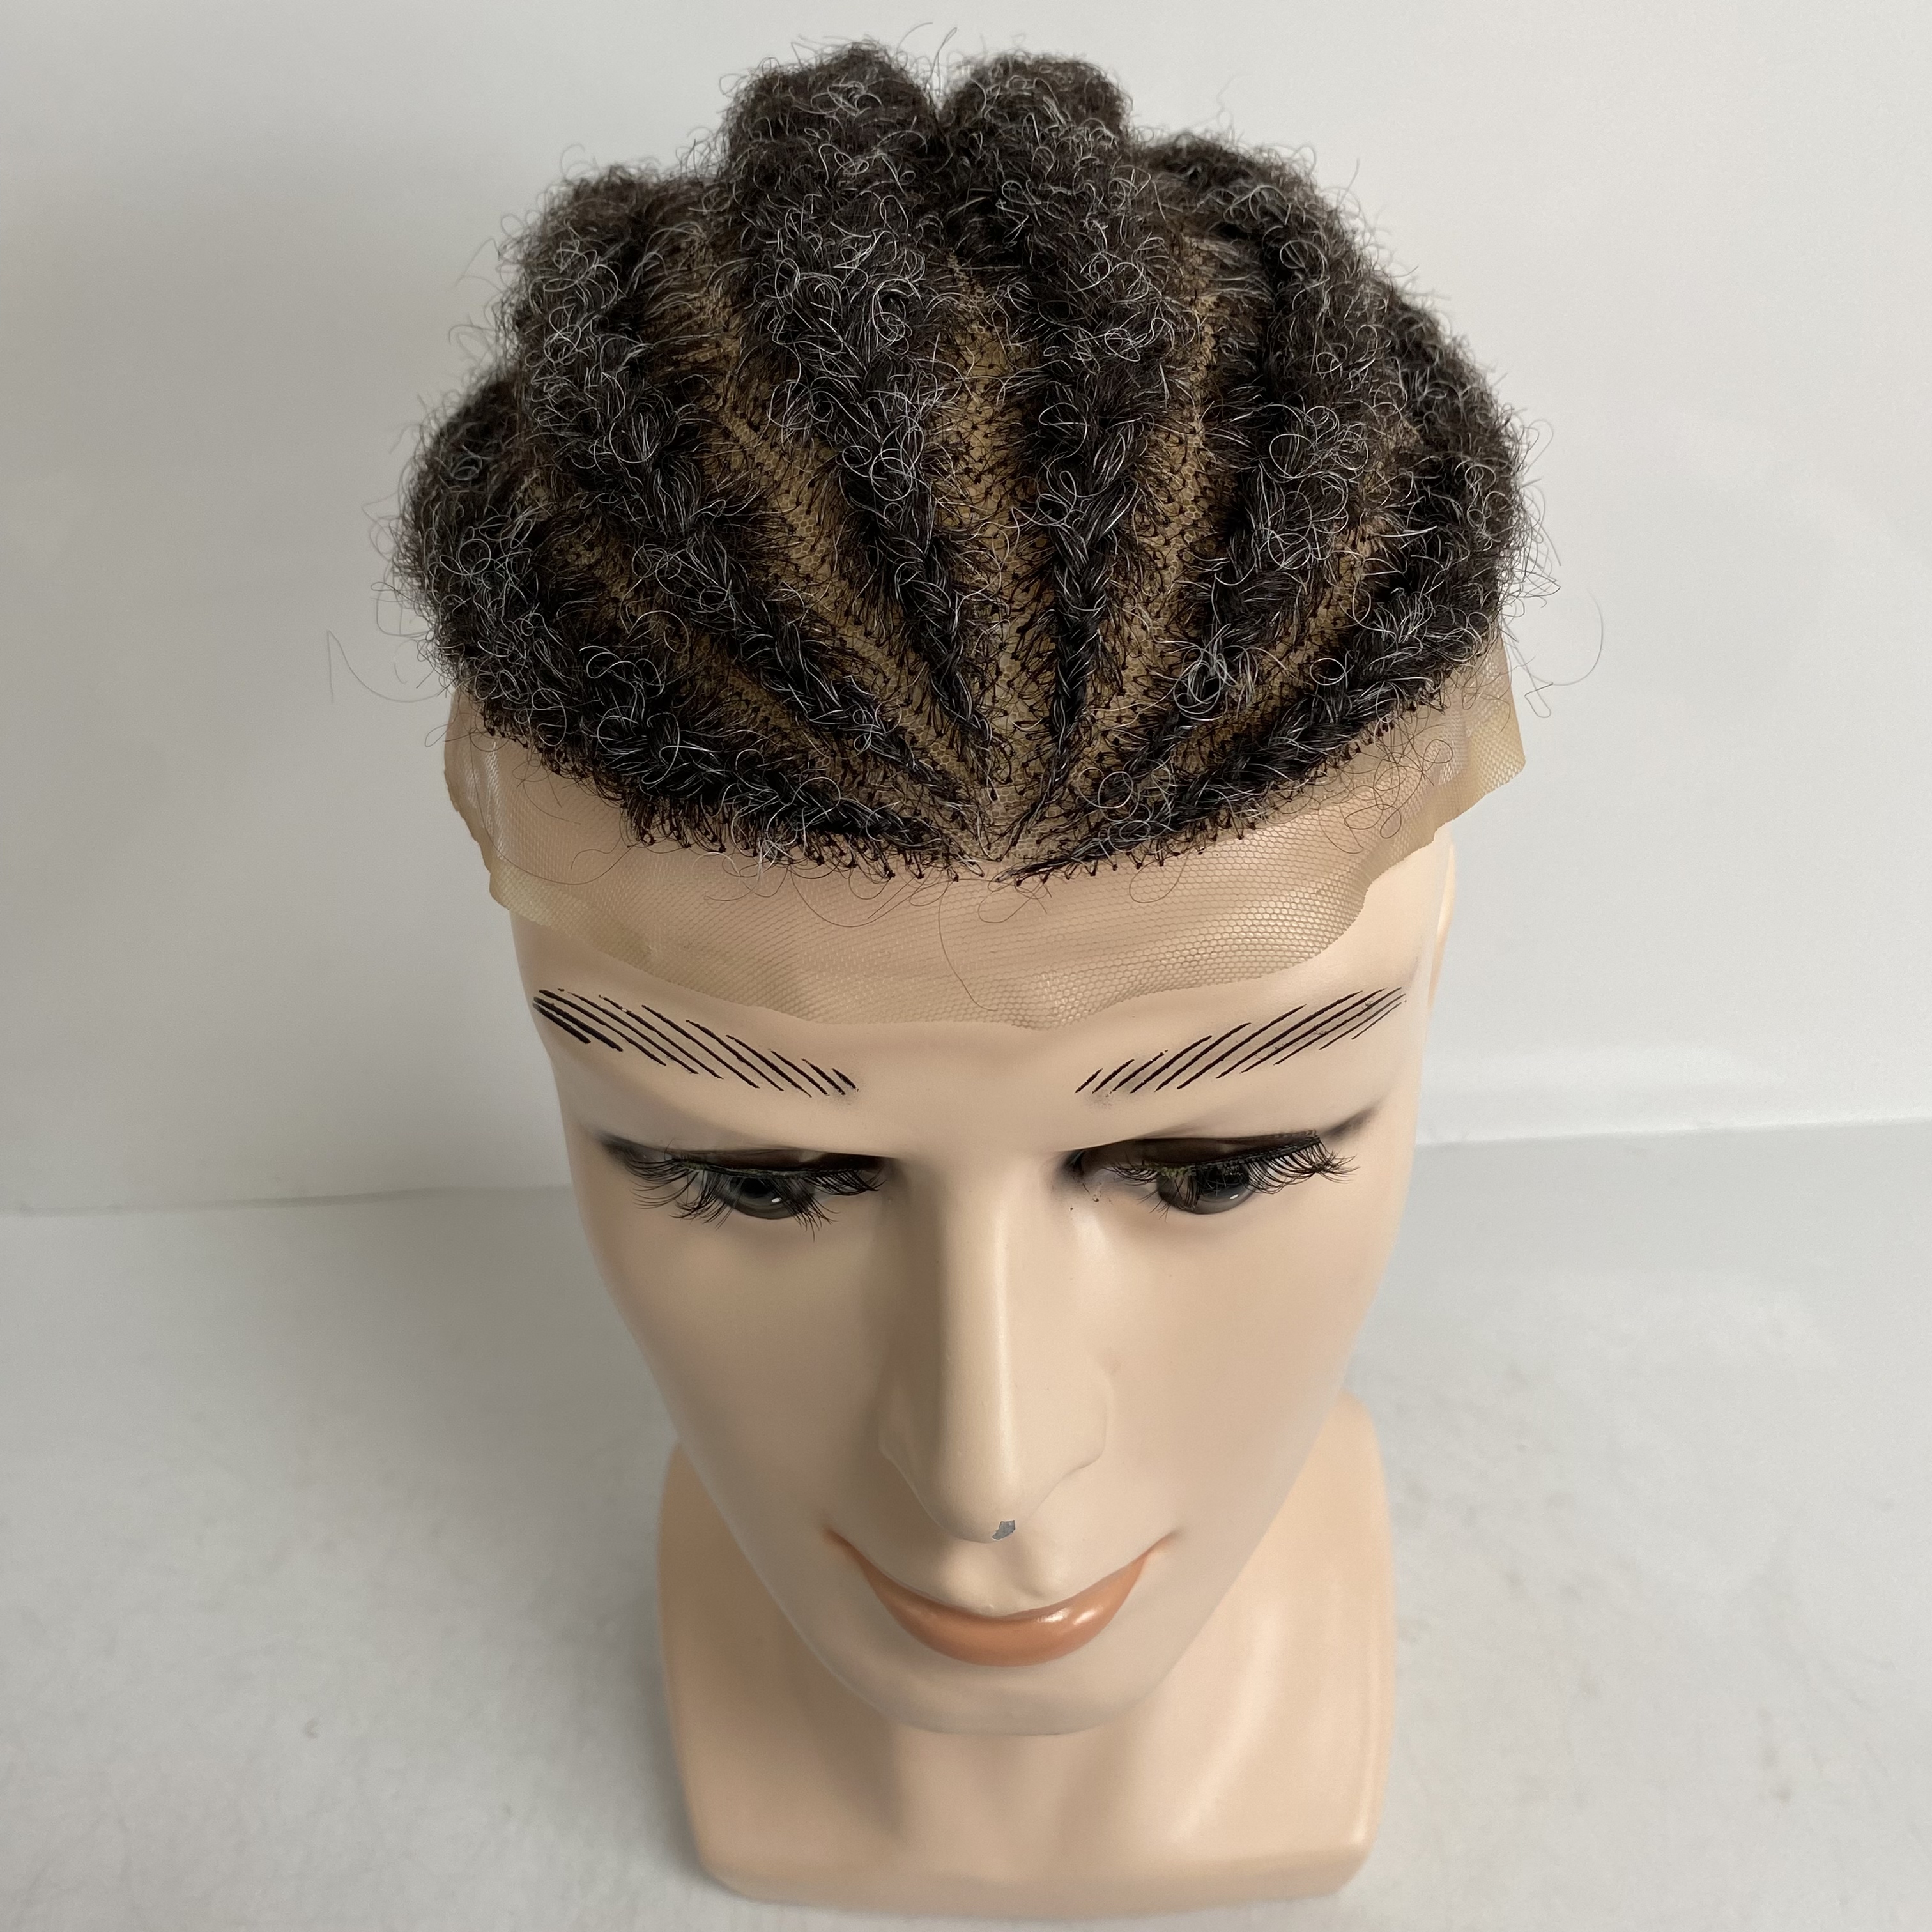 Wear To Go men's Full Lace Toupee African Braided Hairstyles With Thinning Hair Replacement Hair System With Twist Braids Hairstyles